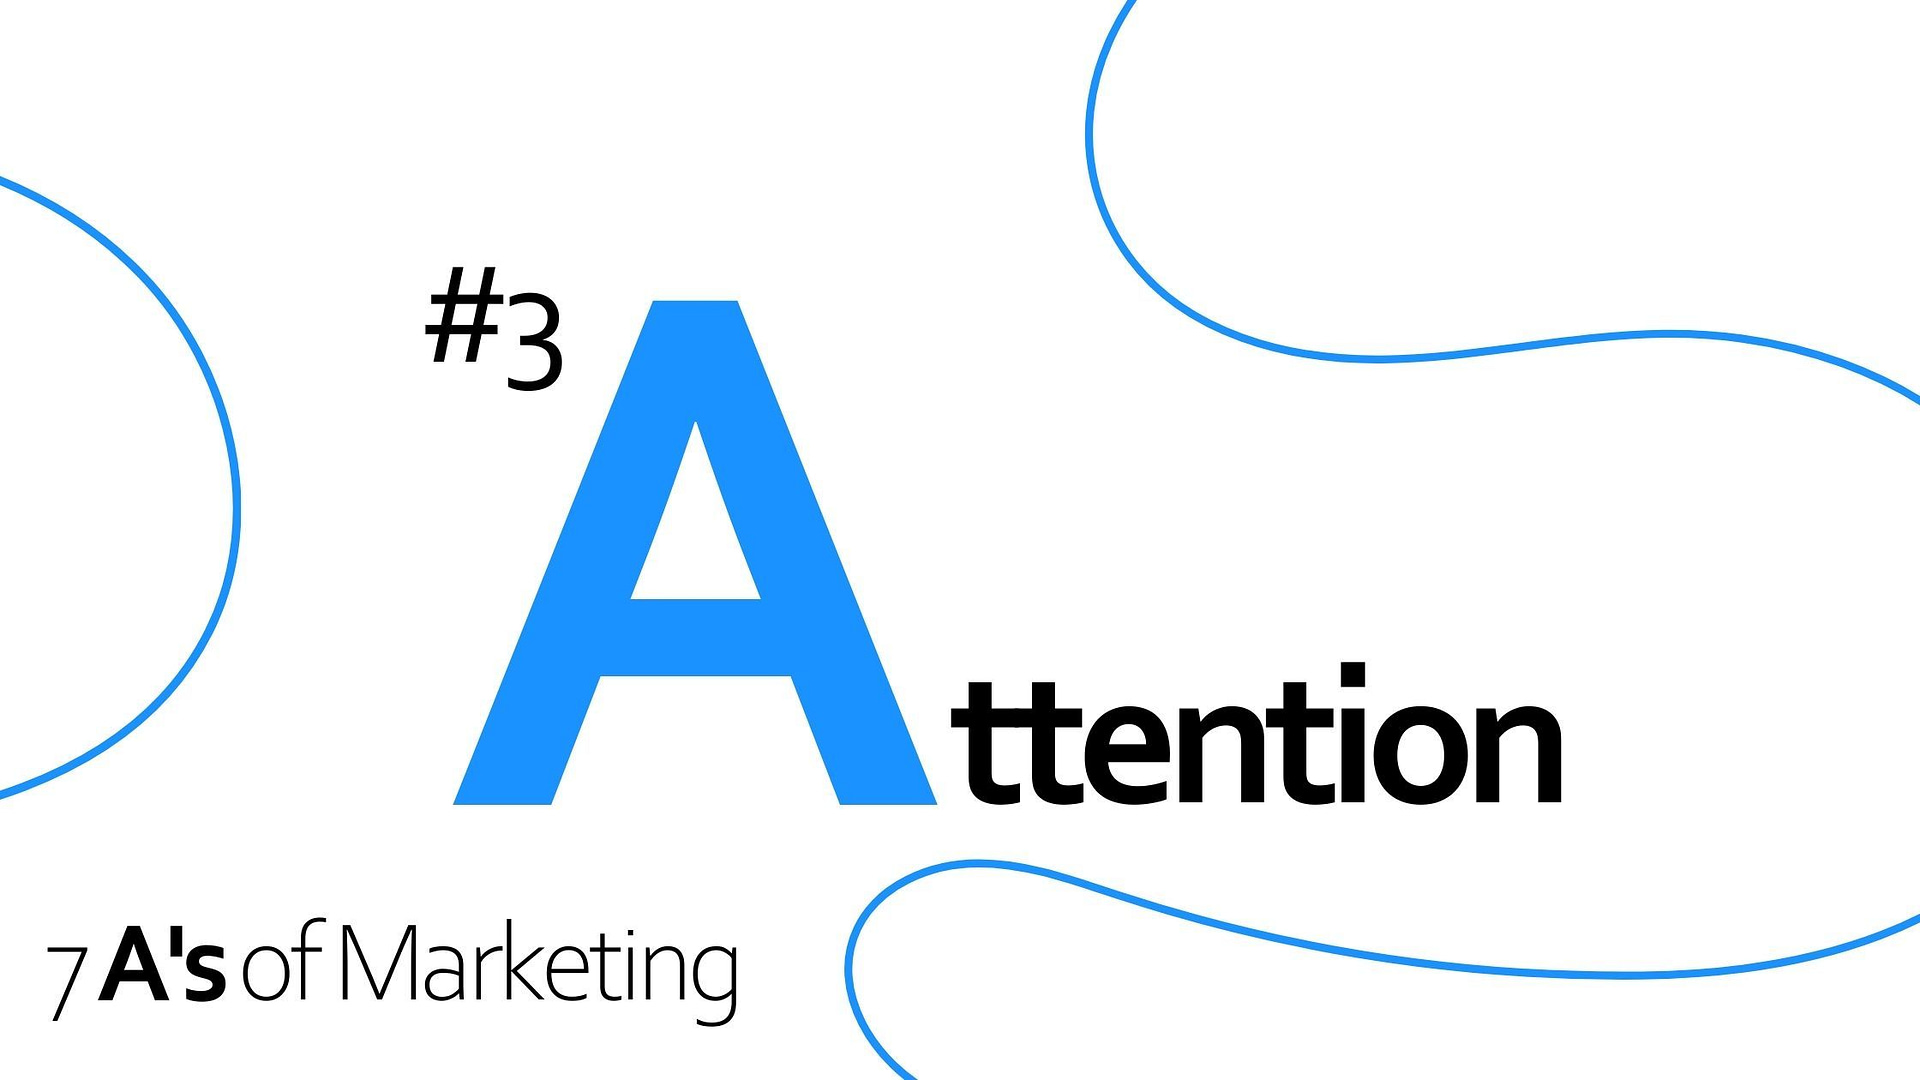 7 A's of Marketing - #3 Attention